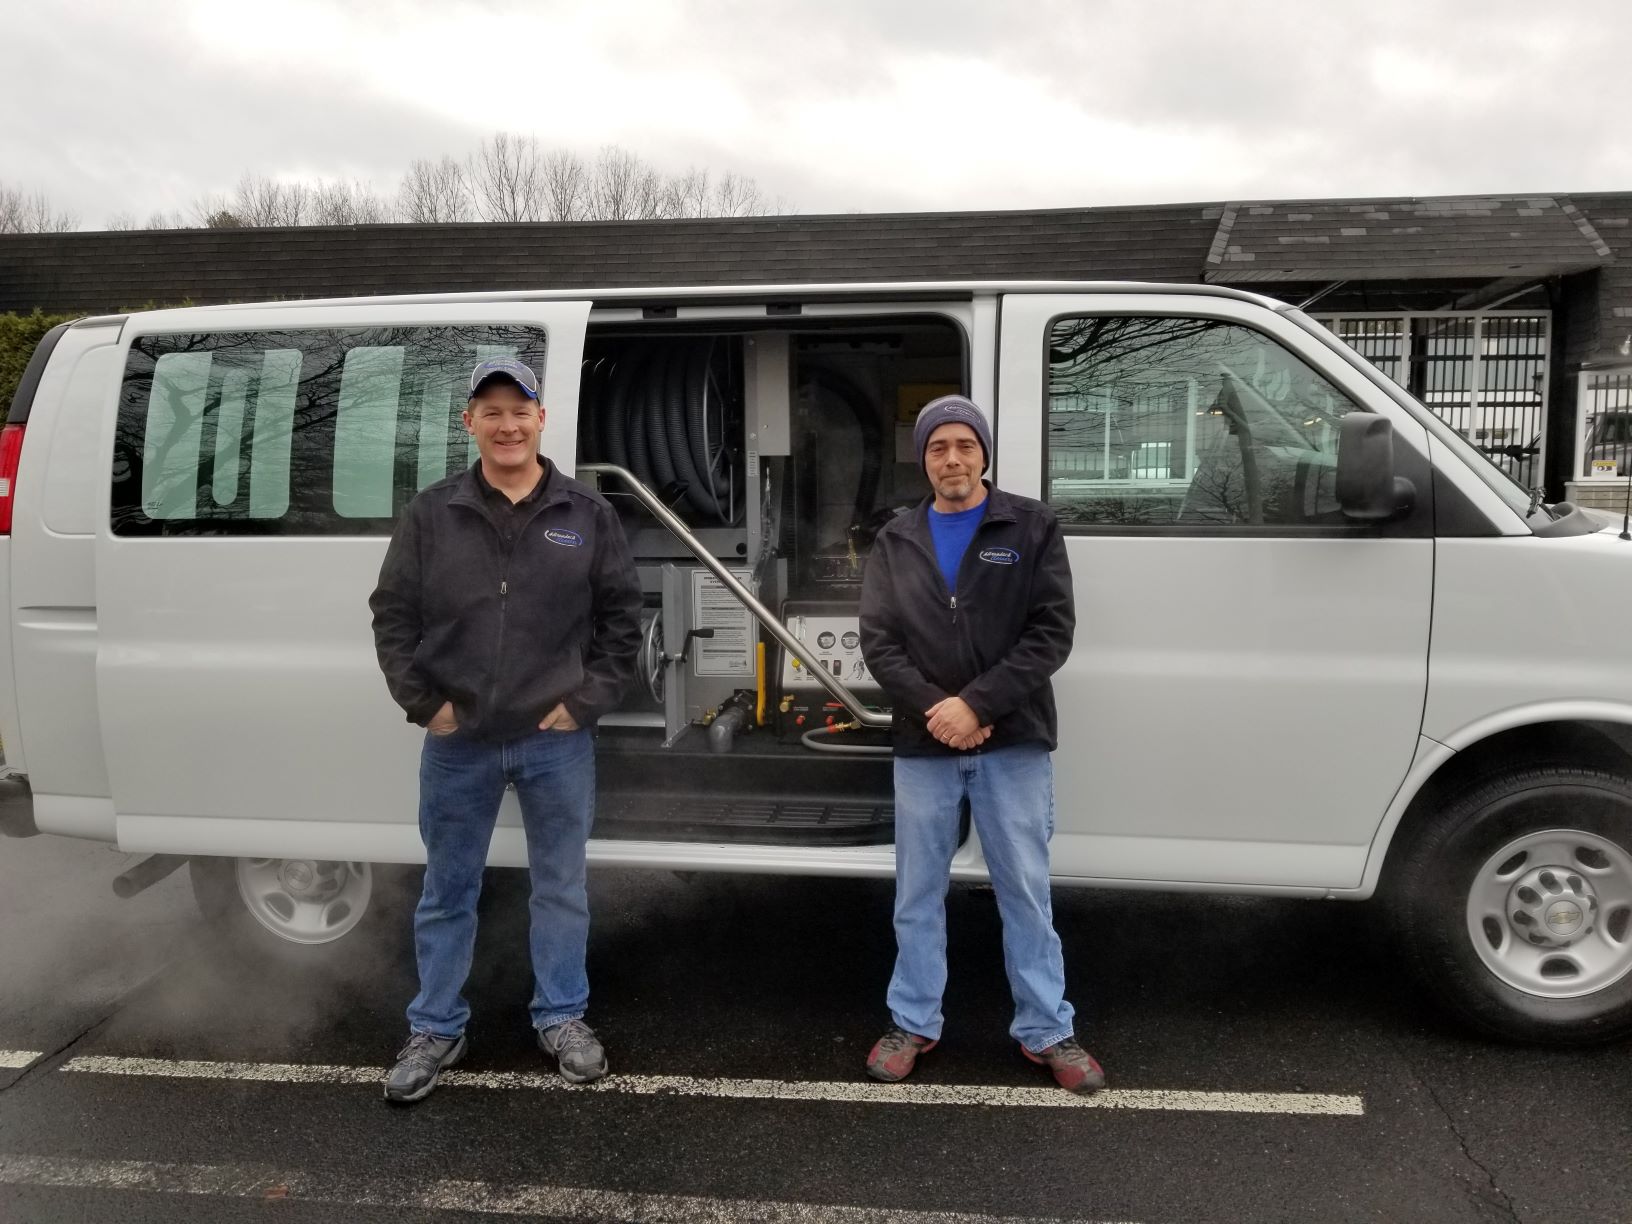 Jason Marlow (Owner) of Adirondack Cleaning Services, of Malone, New York purchased a new Butler System truckmount and van!